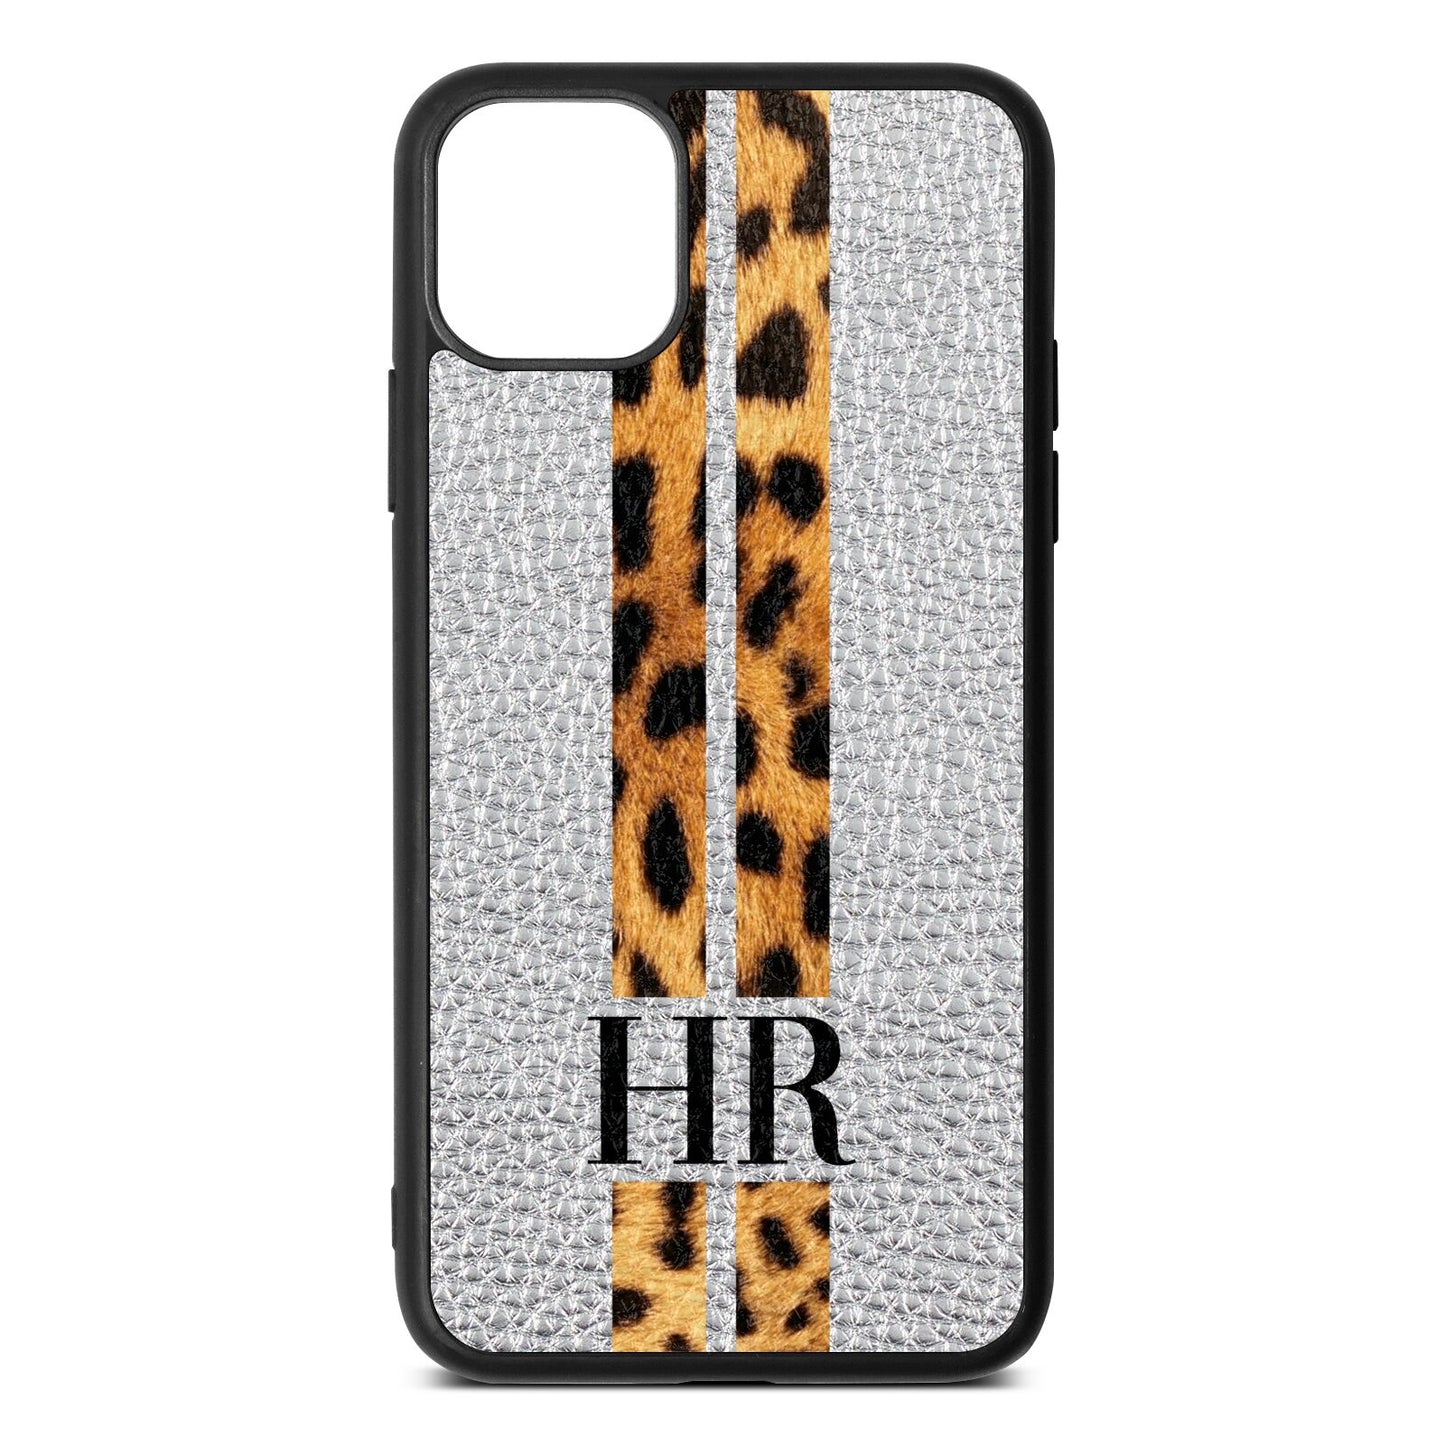 Initialled Leopard Print Stripes Silver Pebble Leather iPhone 11 Pro Max Case